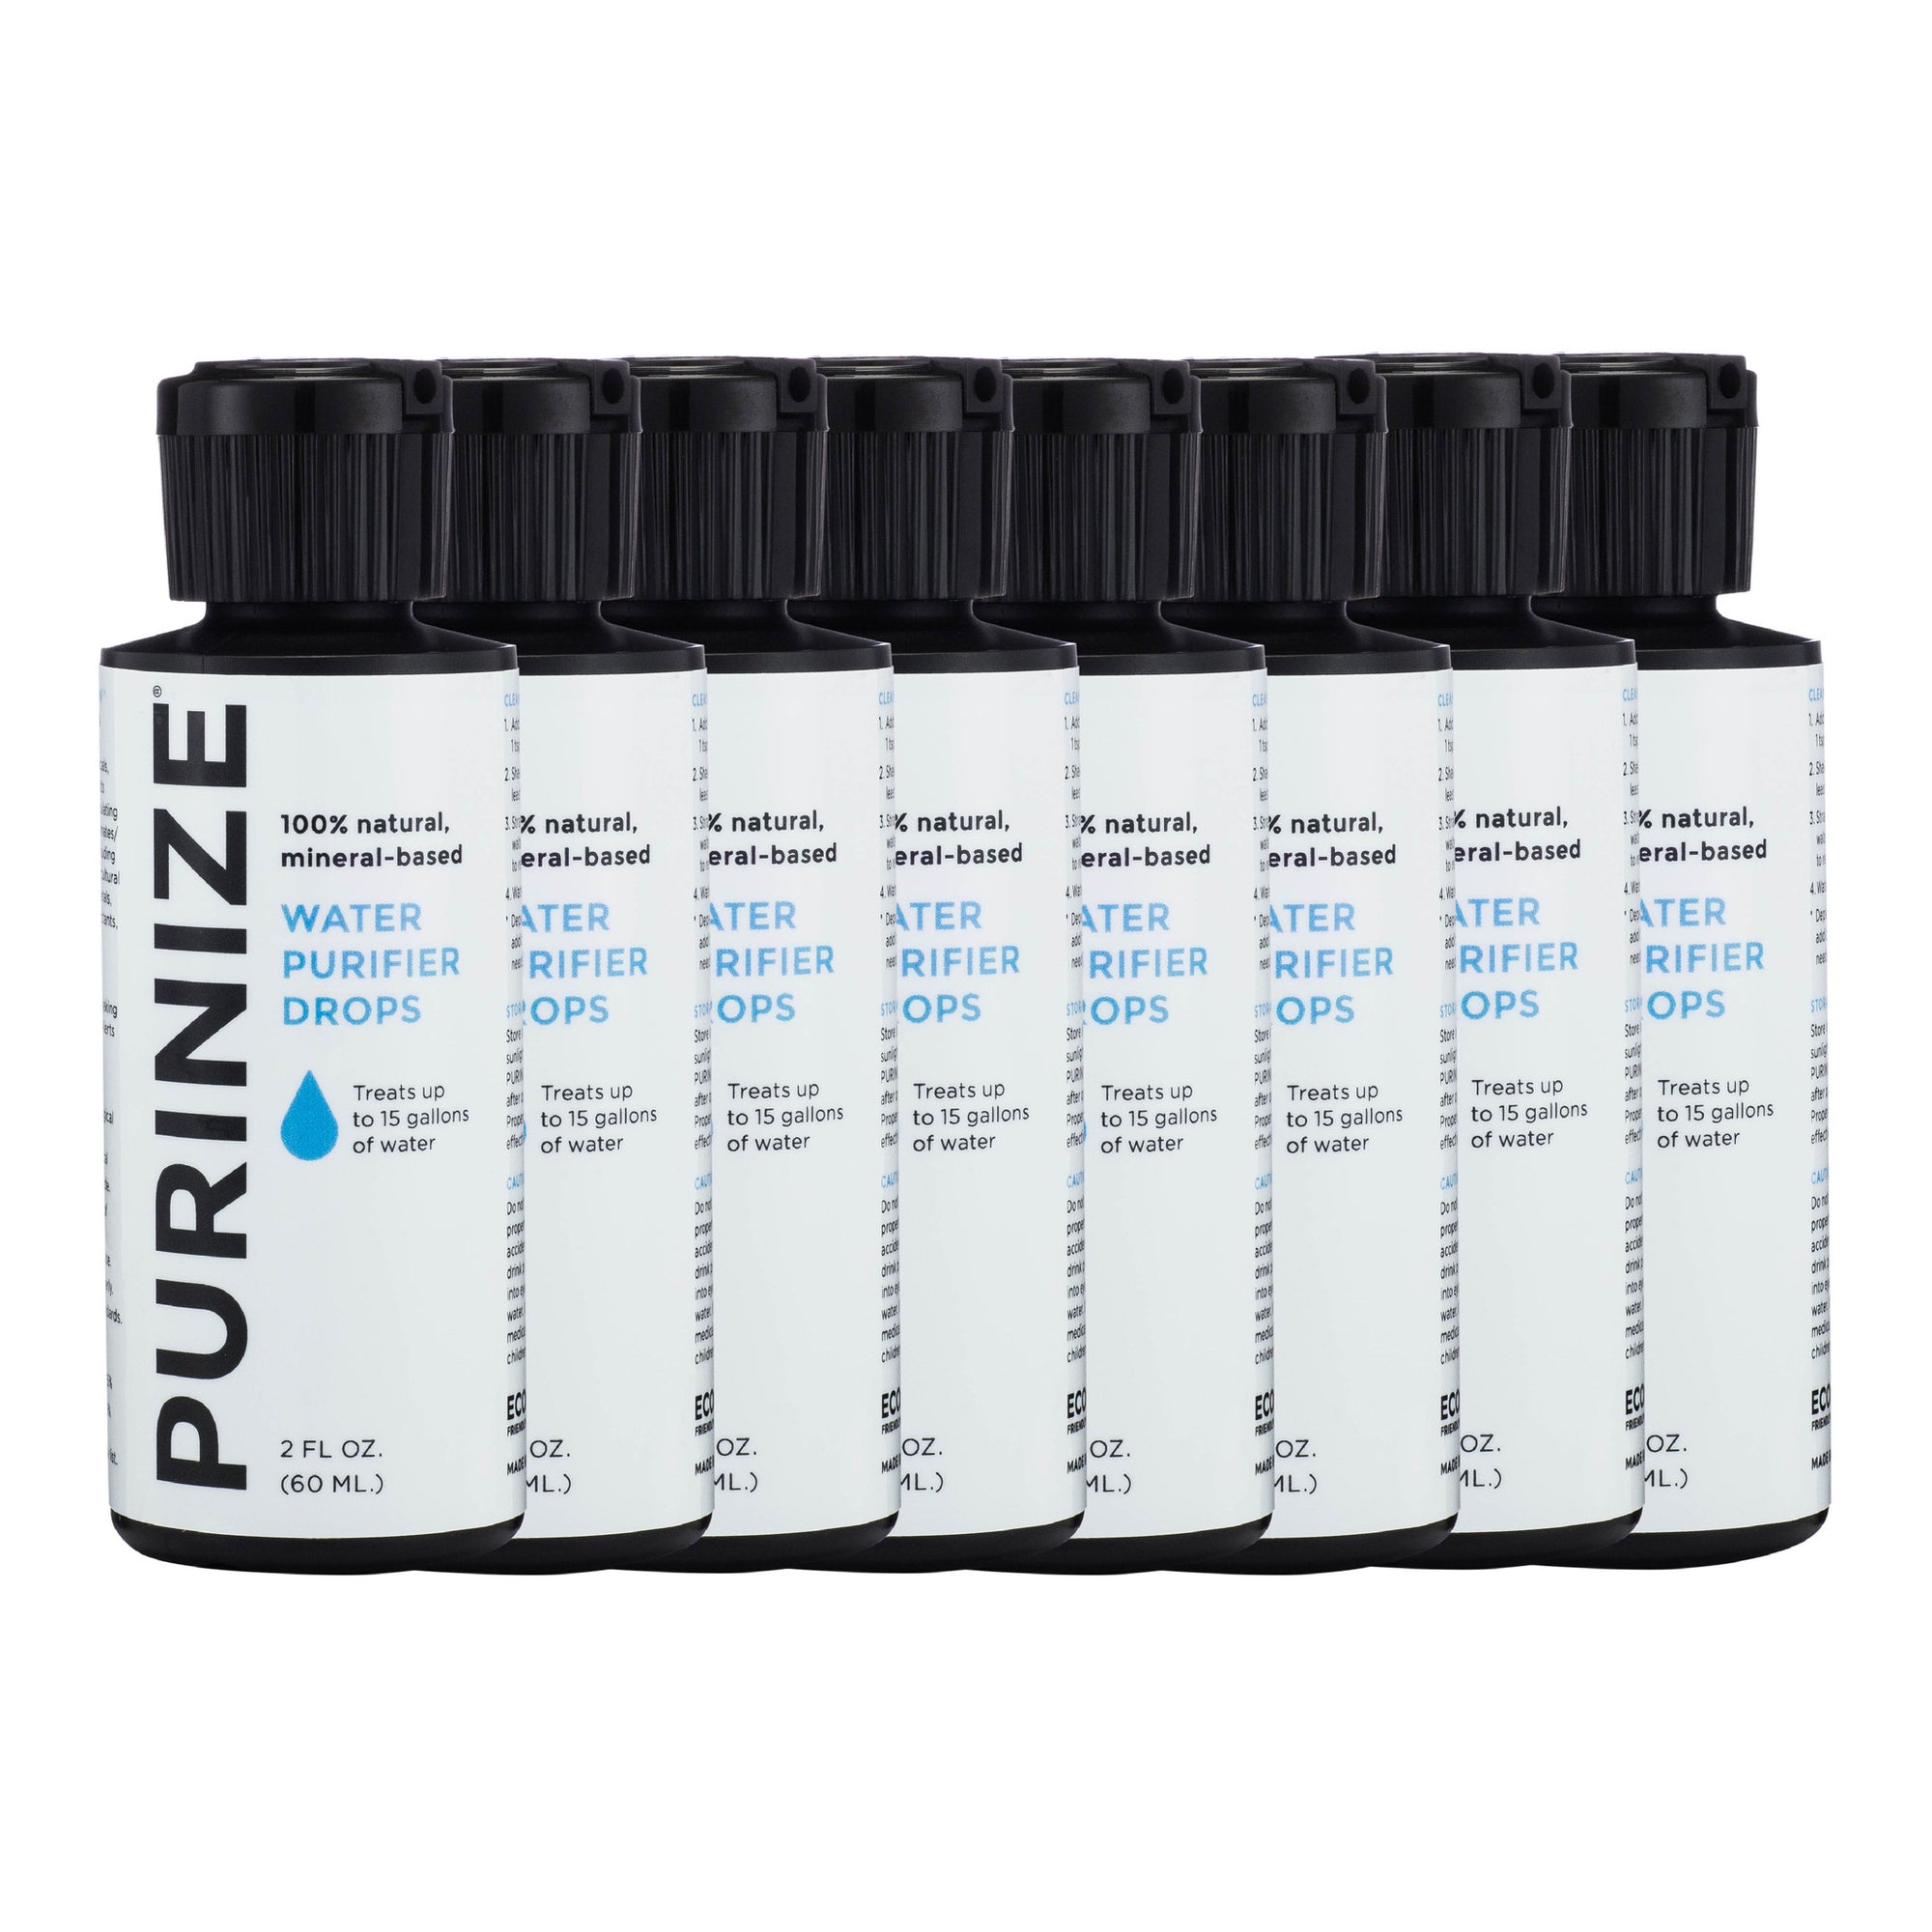 PURINIZE® WATER PURIFIER DROPS 2 OZ. 8-PACK (20% OFF)